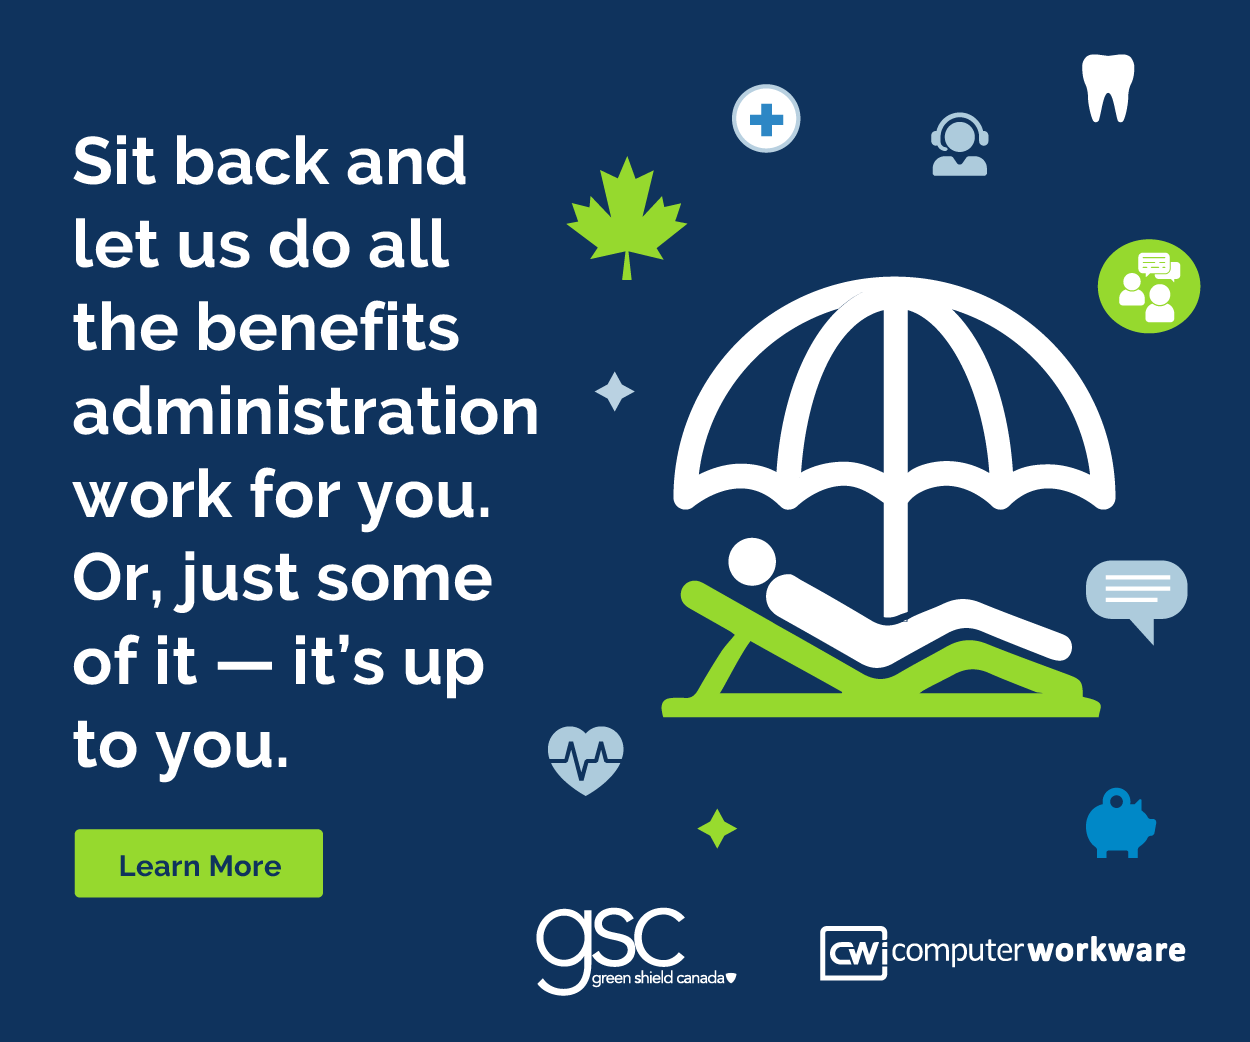 Why choose CWI-GSC's outsourcing solution?